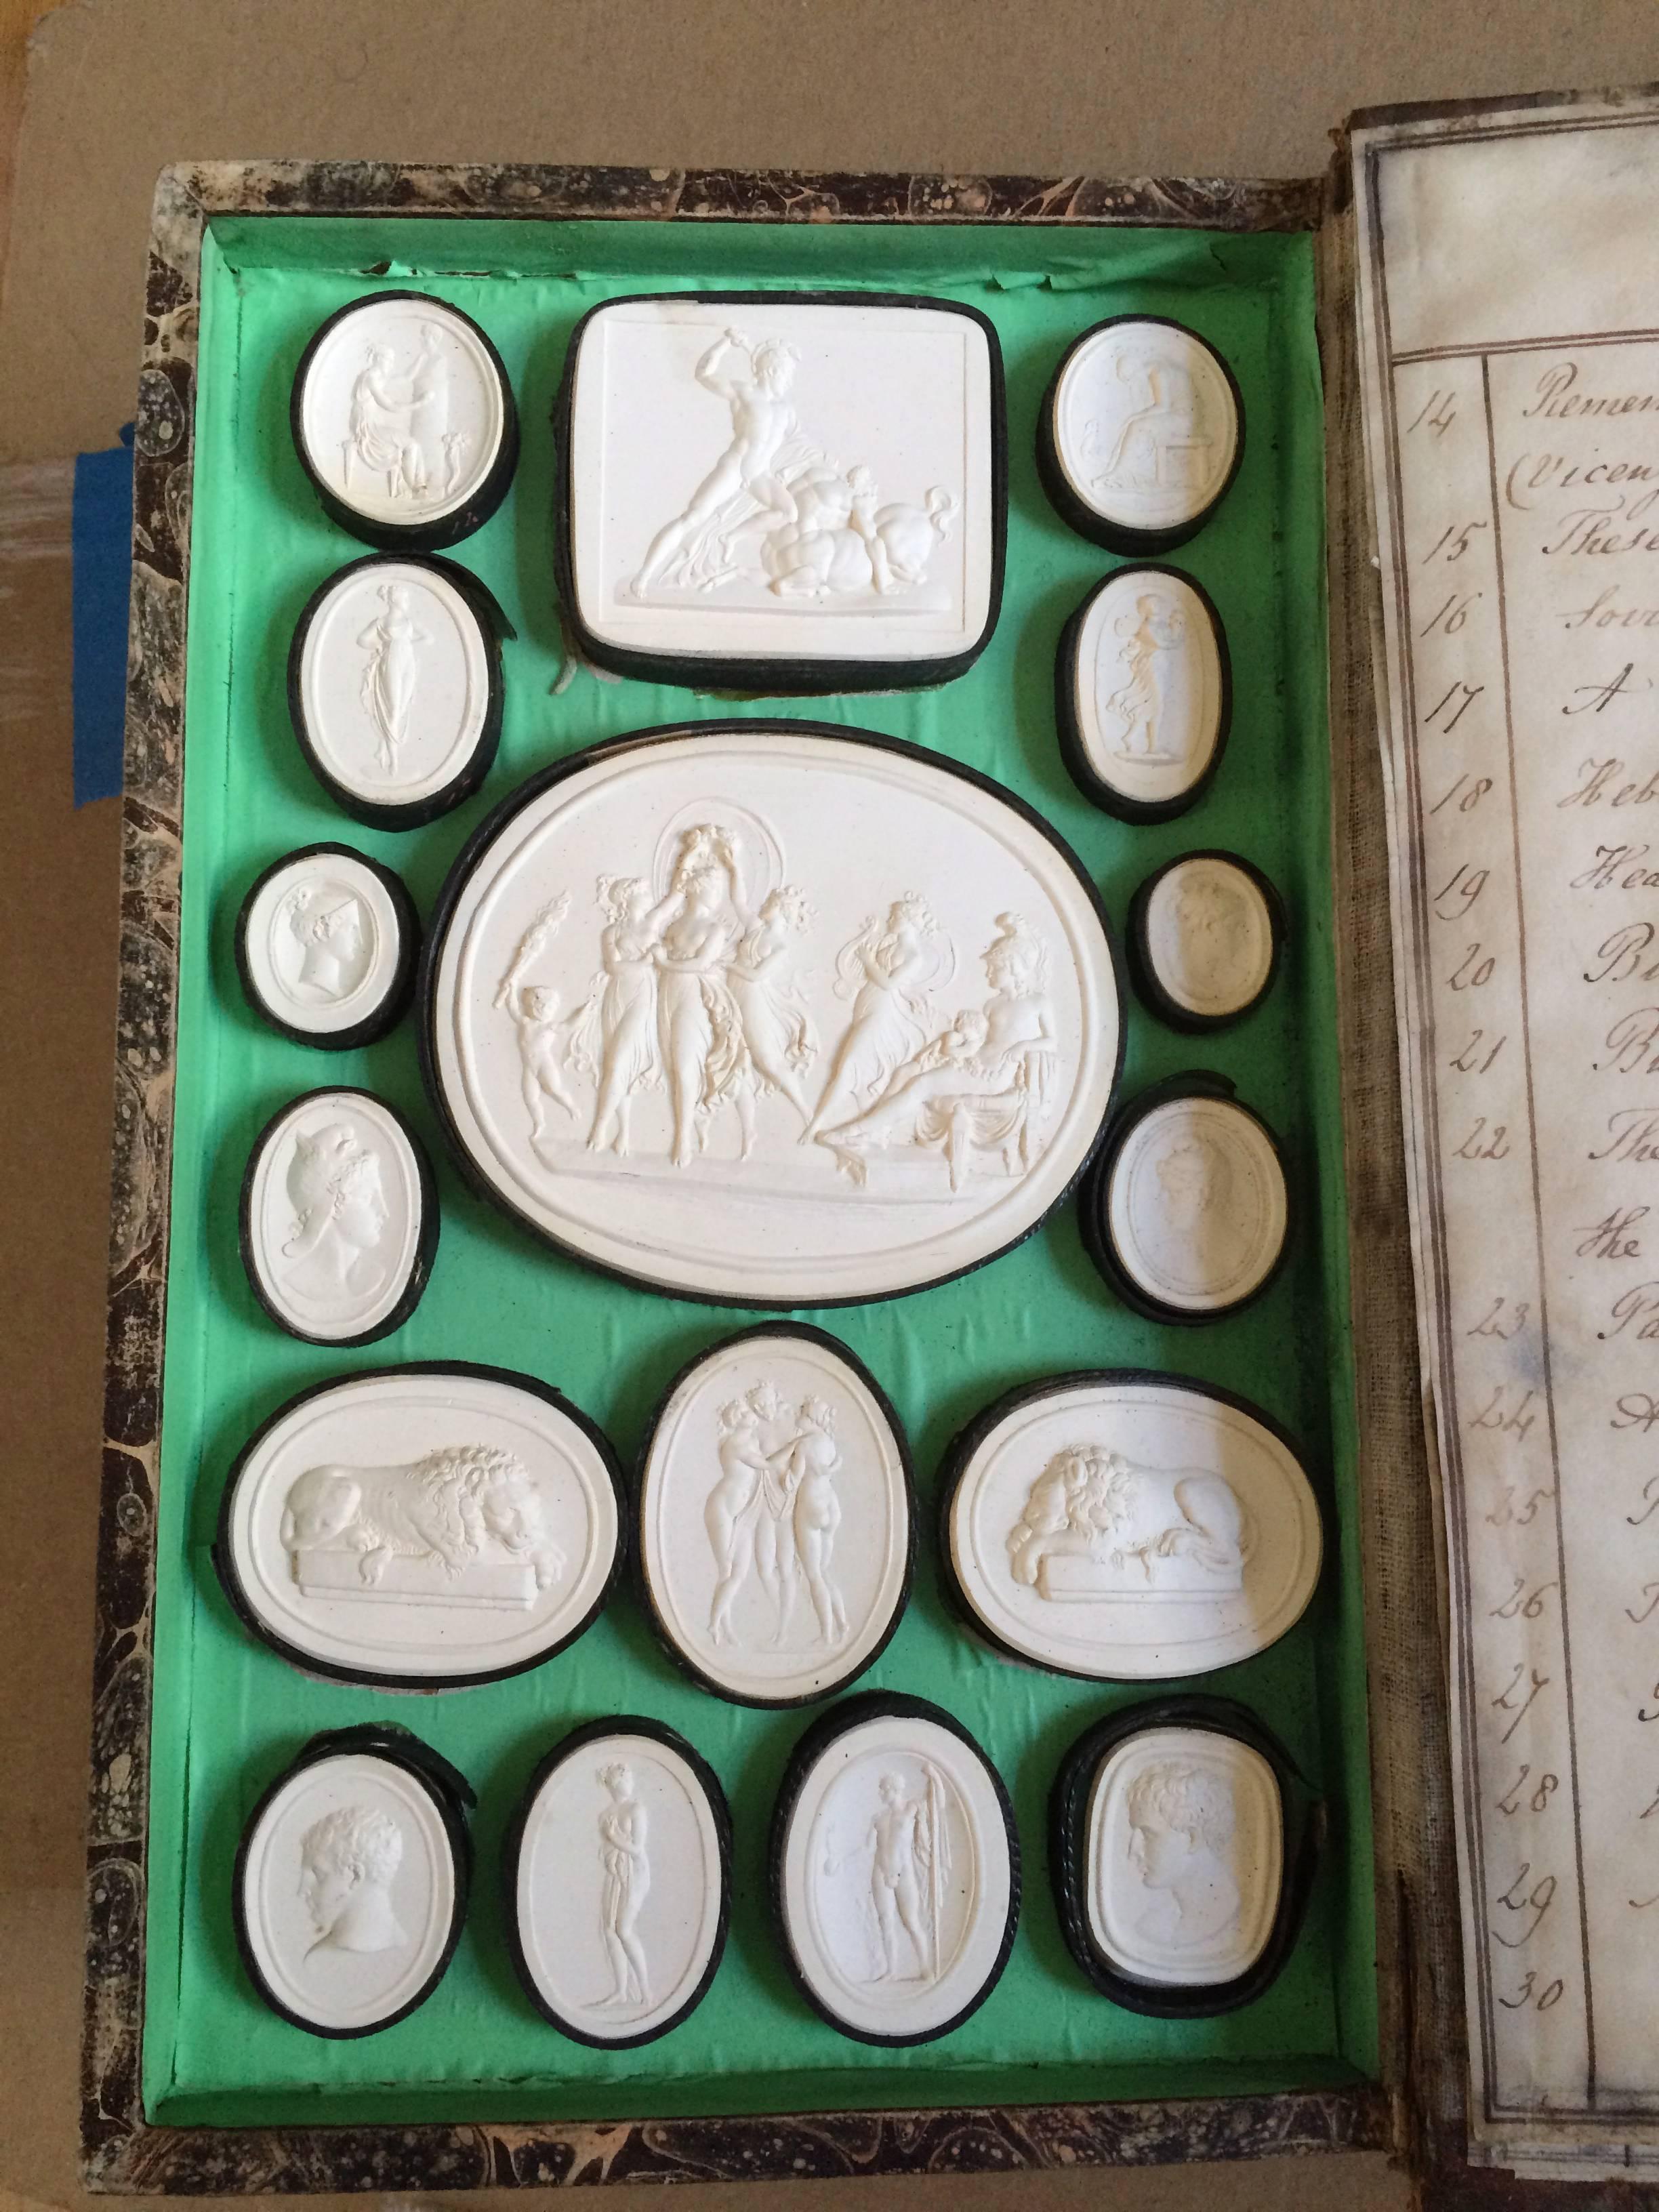 Superb set of Italian Grand Tour plaster intaglios depicting famous art works of Antonio Canova, 1757 – 1822 in Fine detail. Collected in the original book created by the maker Paoletti. The book with marbled paper boards and vellum spine, with hand